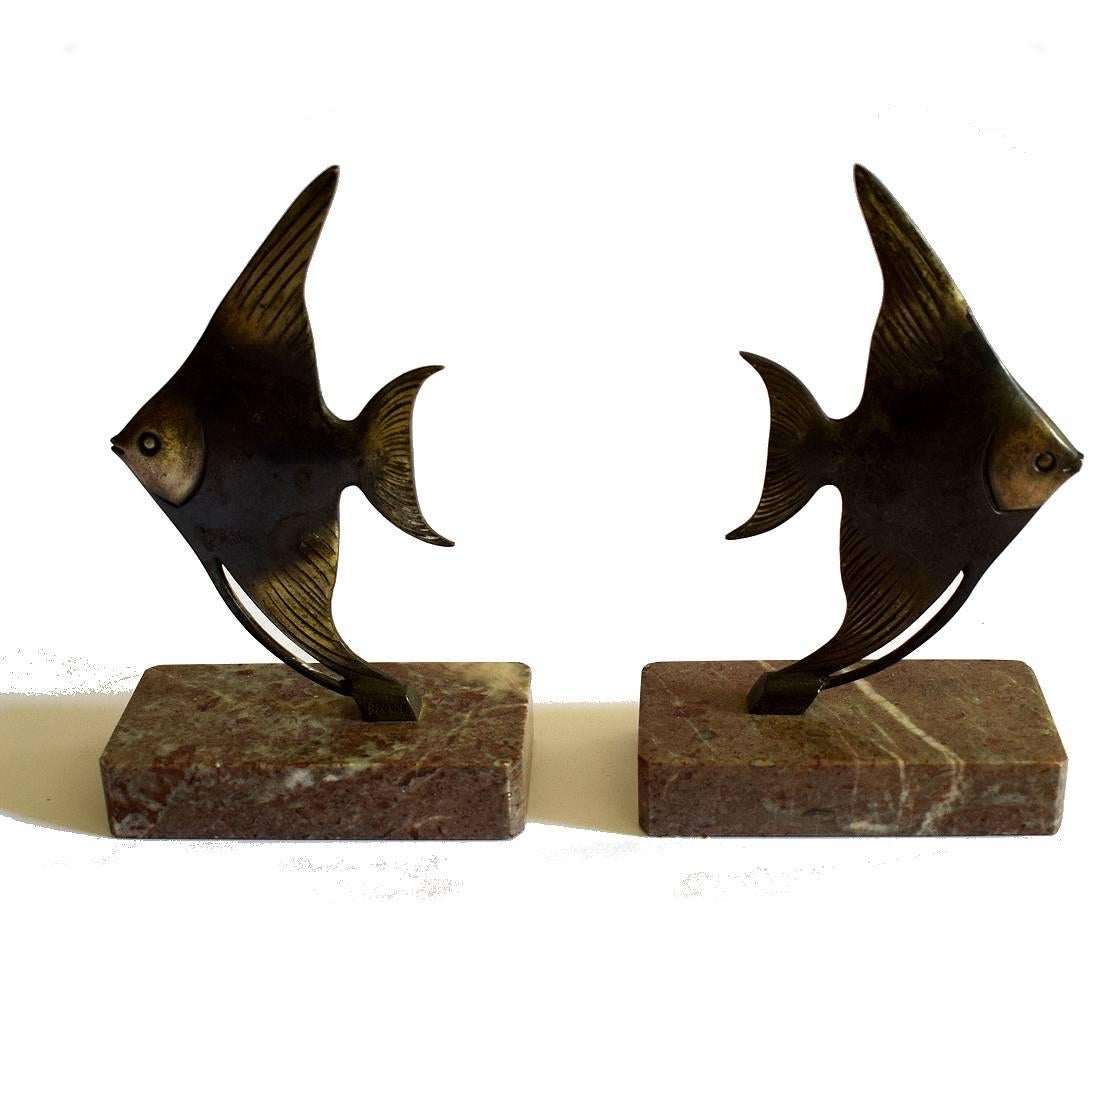 Wonderfully stylish 1930s Art Deco bookends. Originating from France they depict stylised fish in spelter both of which sit on solid marble bases. Condition is excellent, no damage, only patina to the fish.